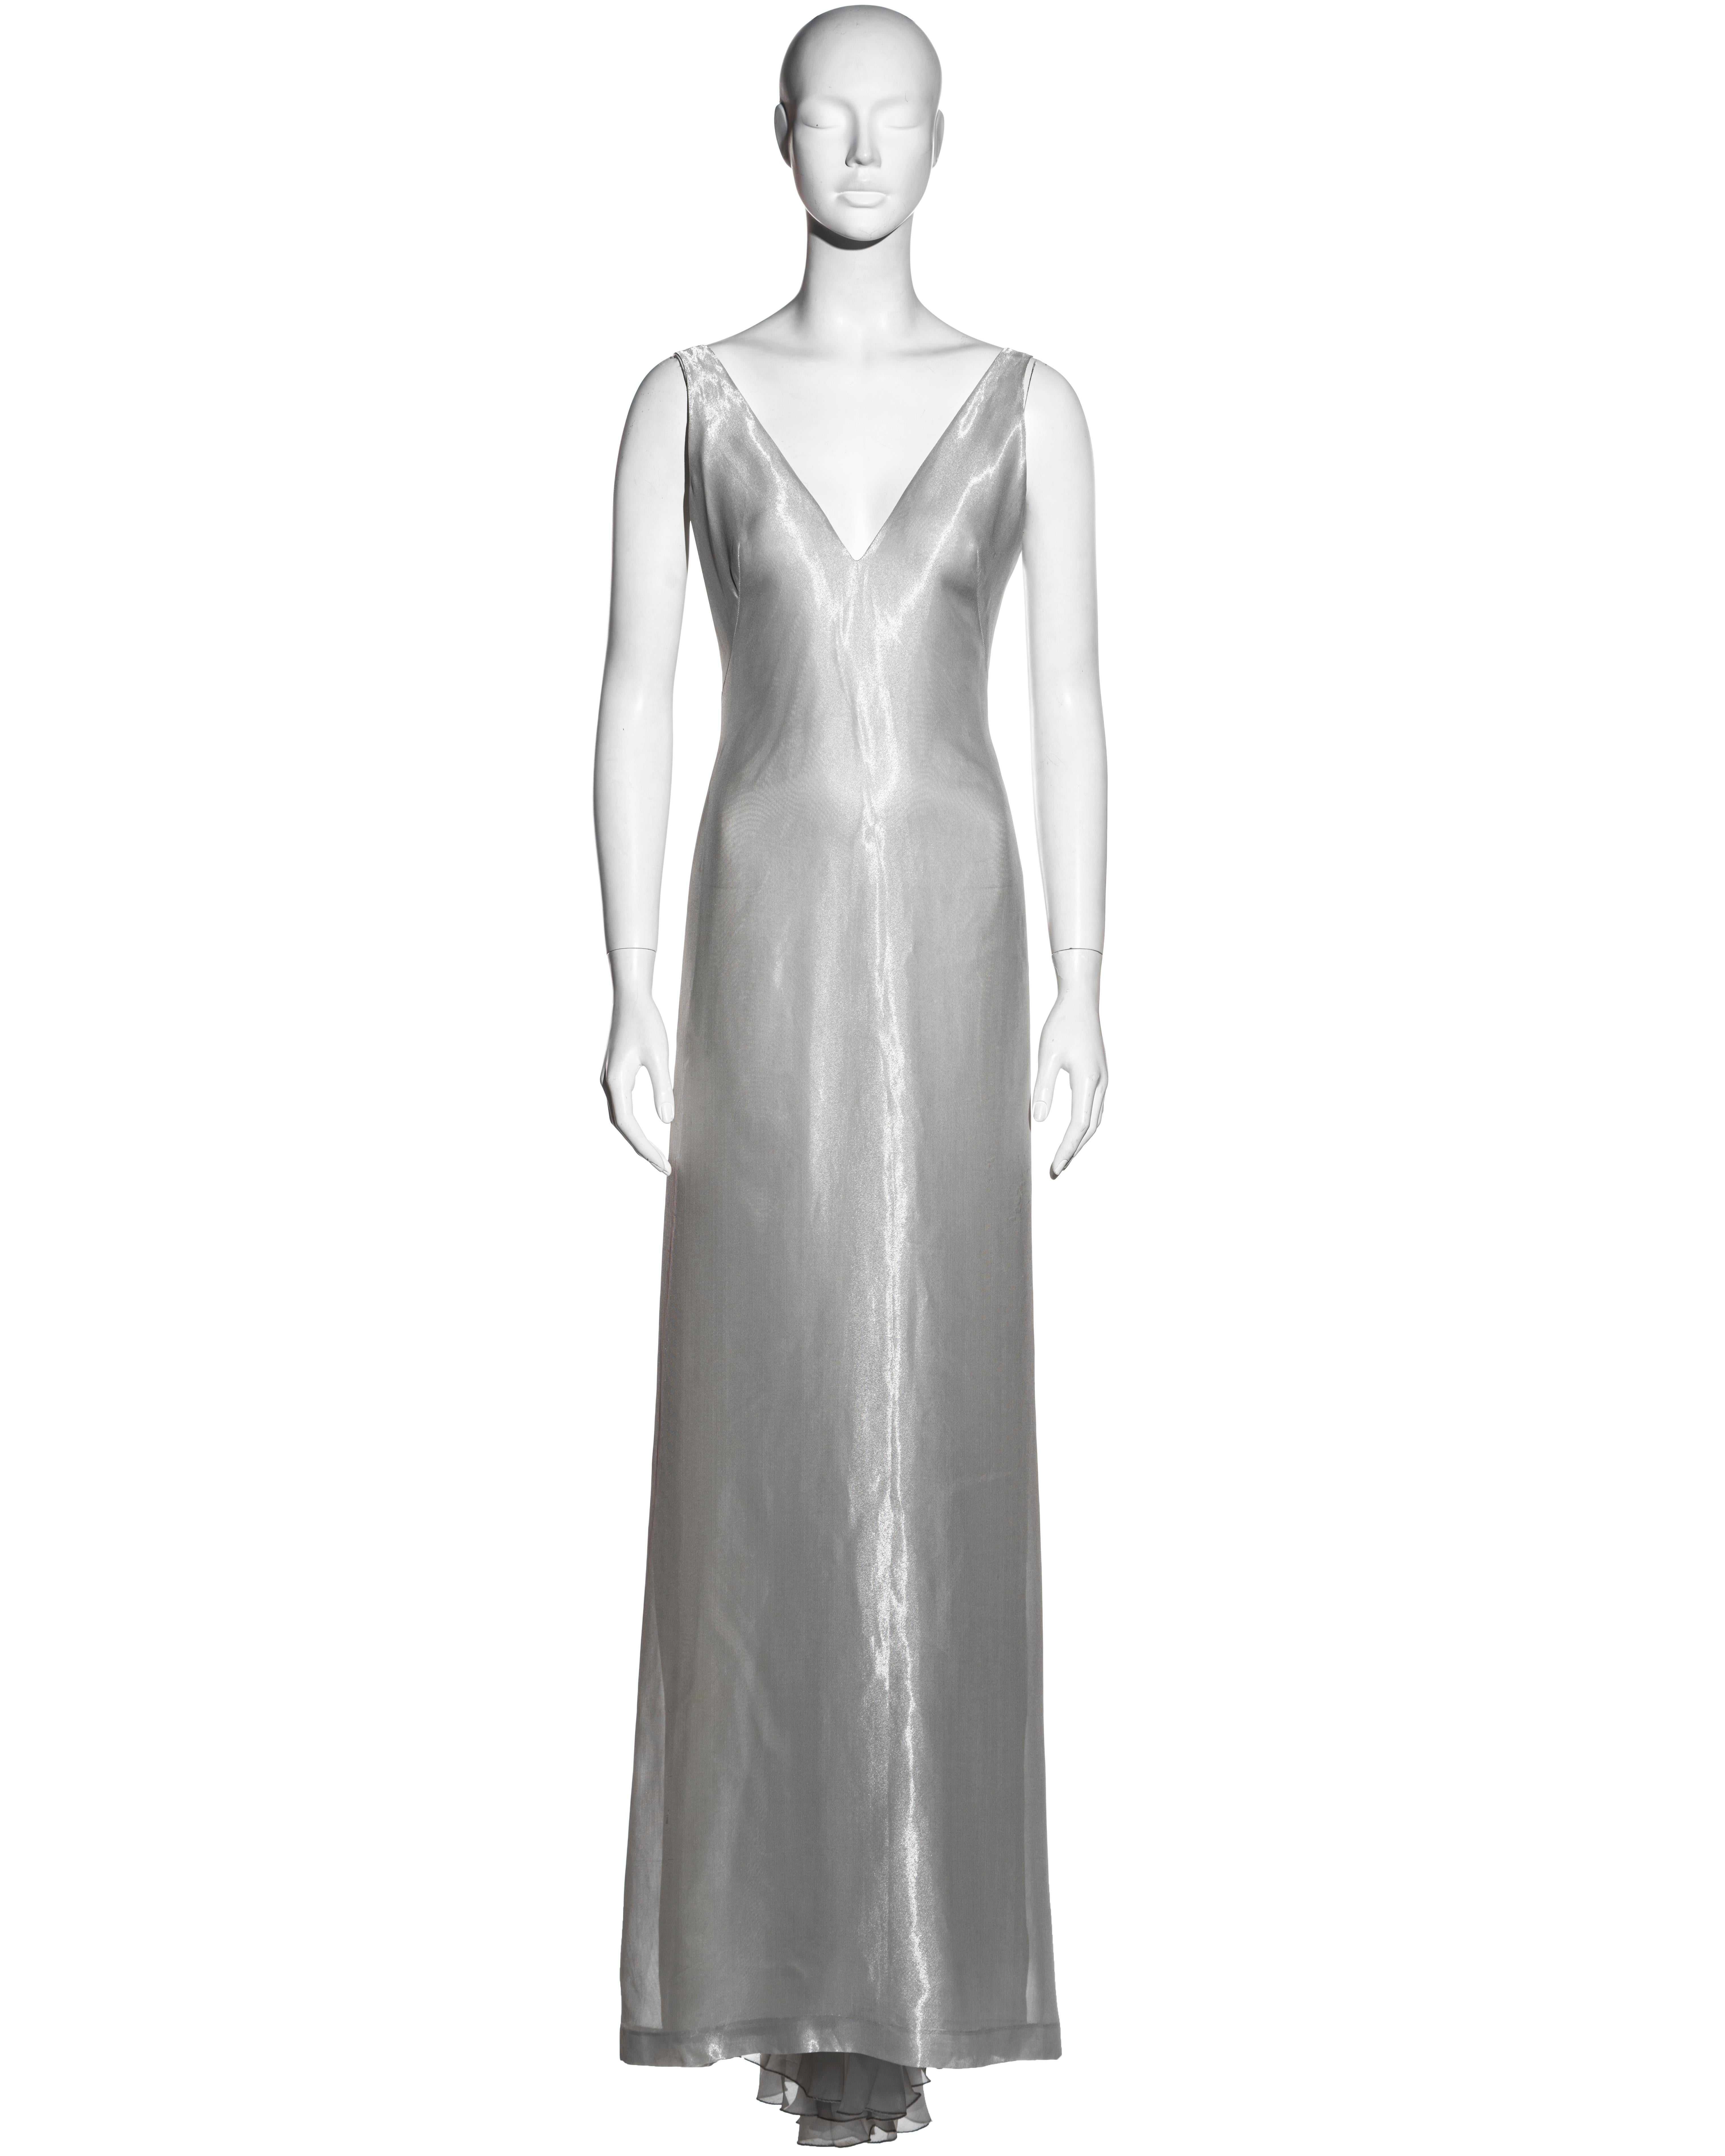 ▪ Alexander McQueen metallic silver silk lamé evening dress
▪ V-neck 
▪ Open back with a belted waist
▪ Accordion pleated panel starting at the hip and finishing into a train
▪ Concealed zipper at the center-back
▪ 60% Metal, 40% Silk
▪ IT 44 - FR